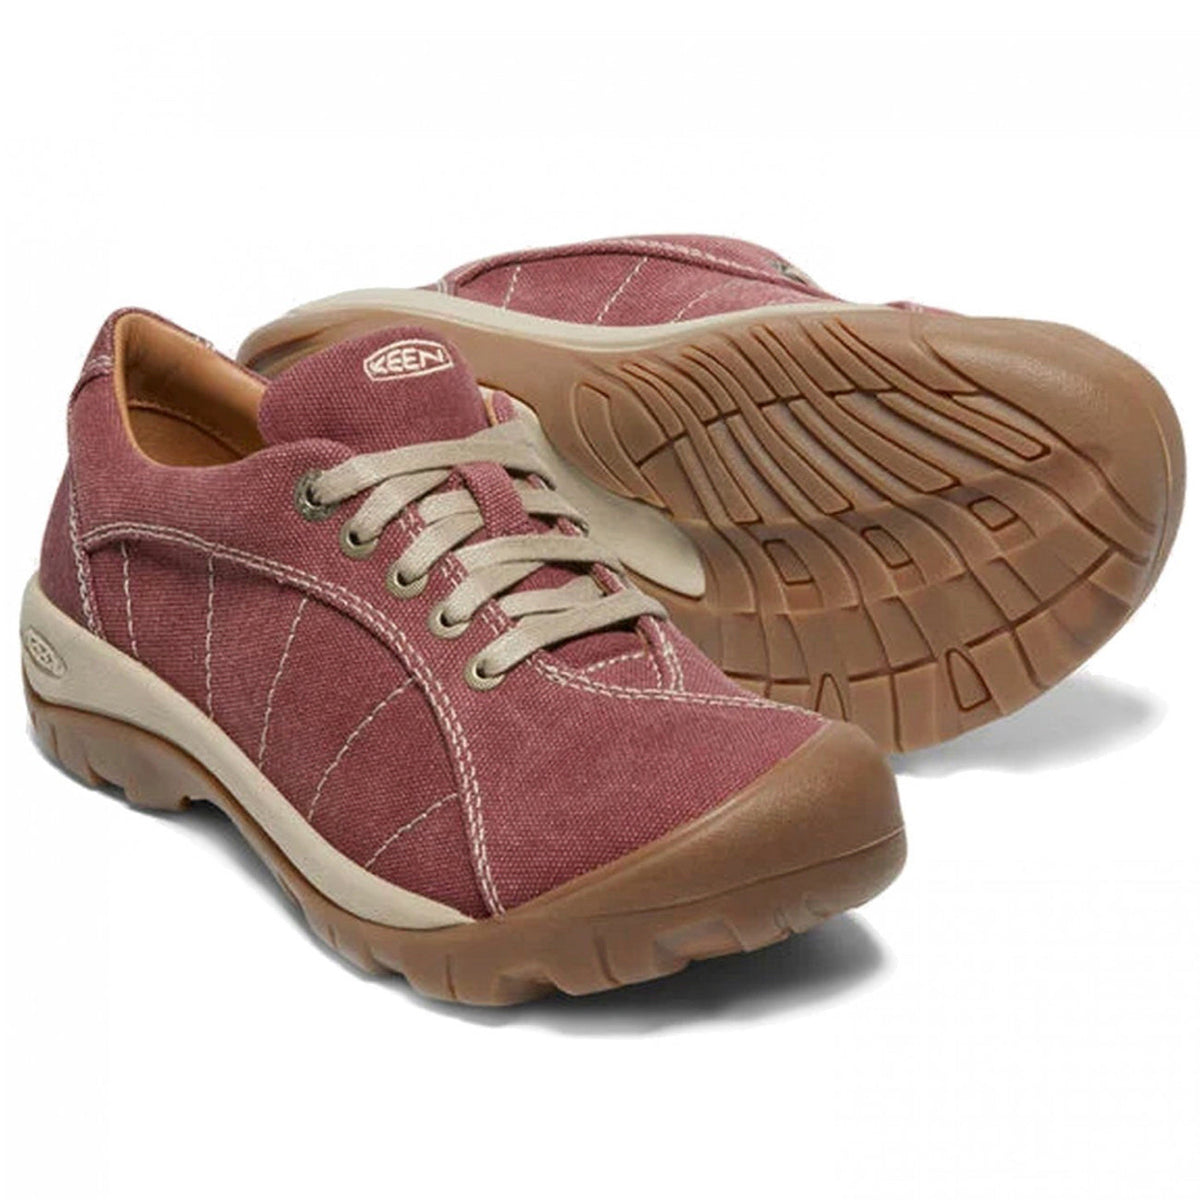 Keen, Presidio Canvas, Womens, Red Plaza Taupe Shoes Keen 